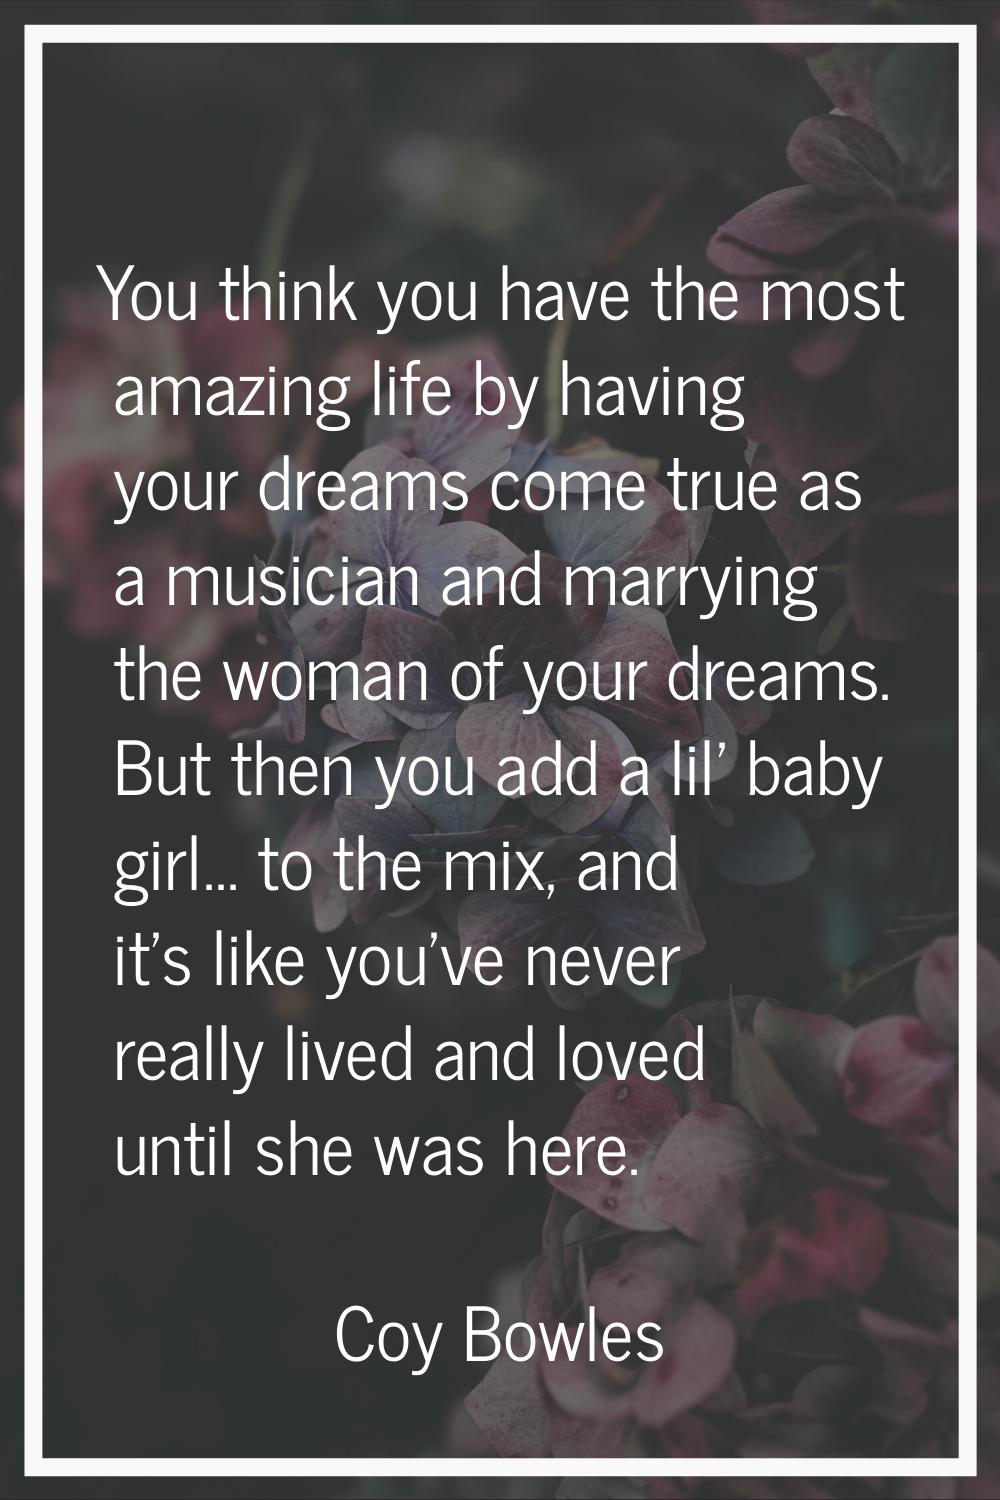 You think you have the most amazing life by having your dreams come true as a musician and marrying